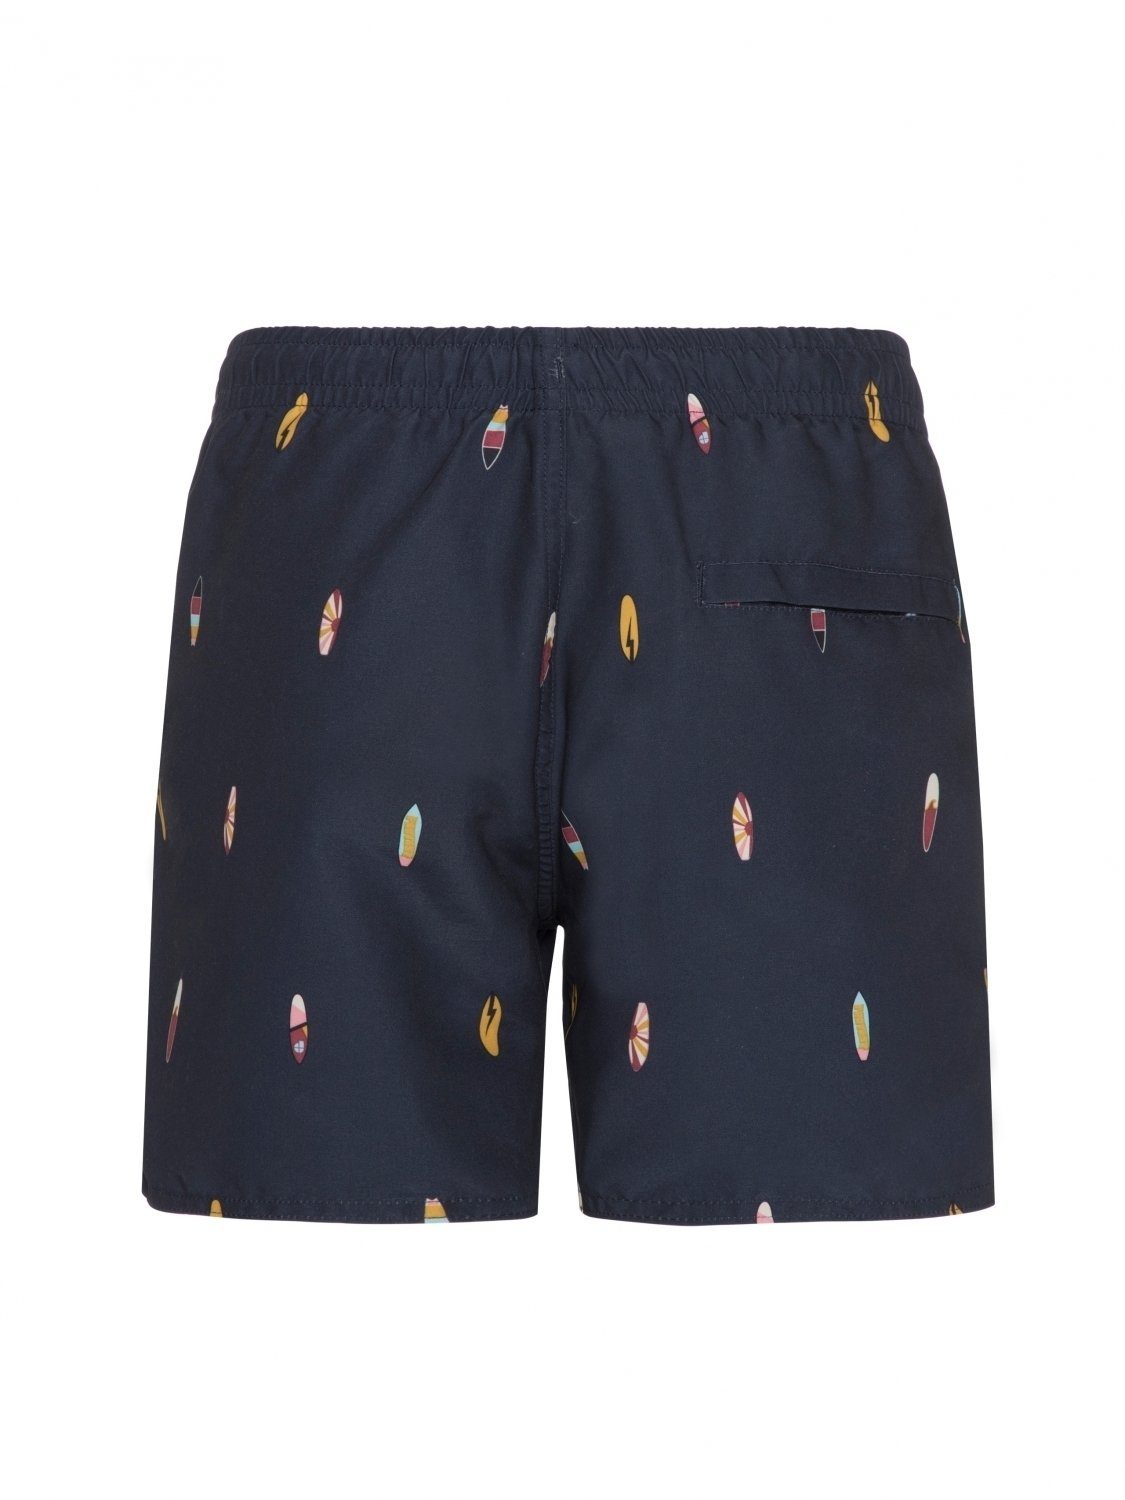 Protest Jungen Badeshorts Protest Badehose Prttyko